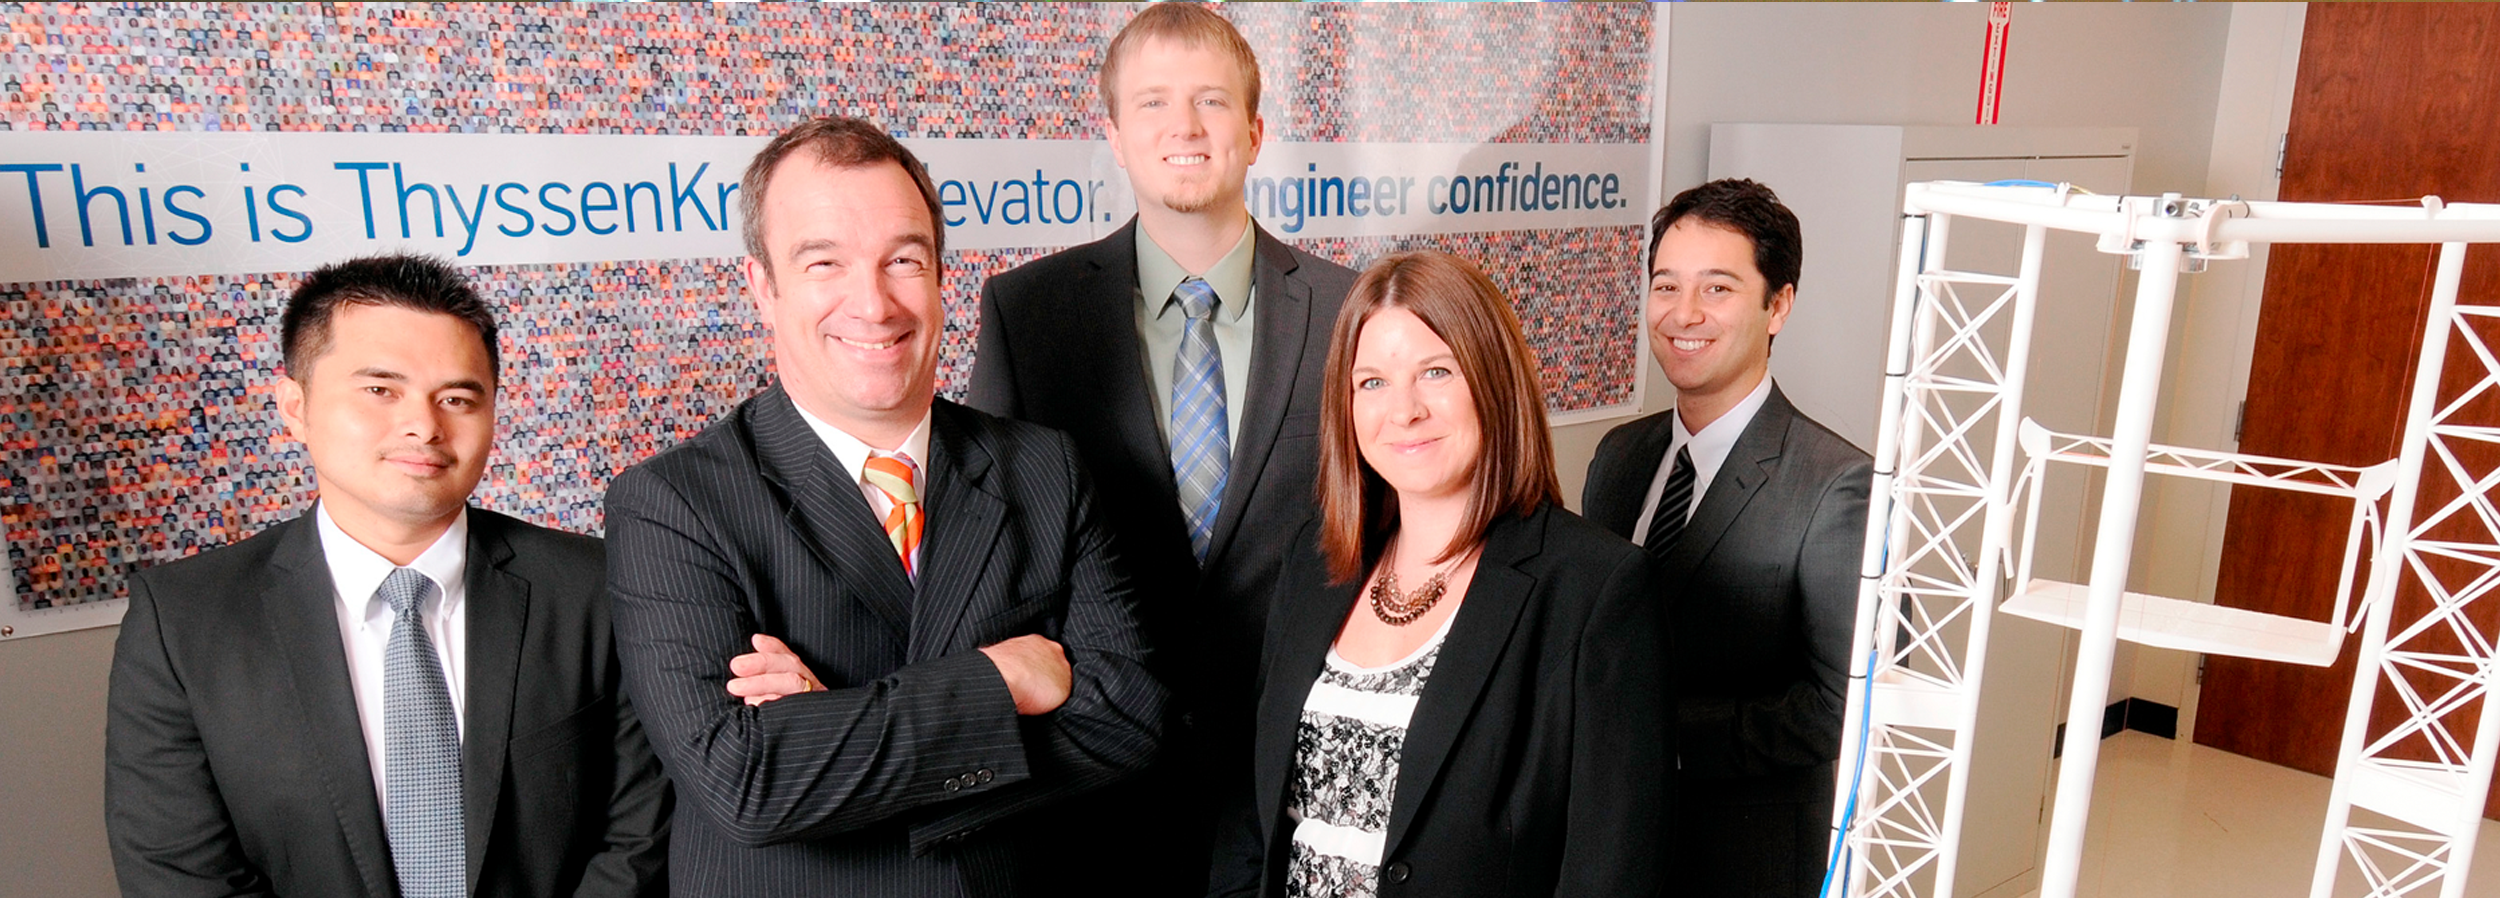  Banner image of business professionals